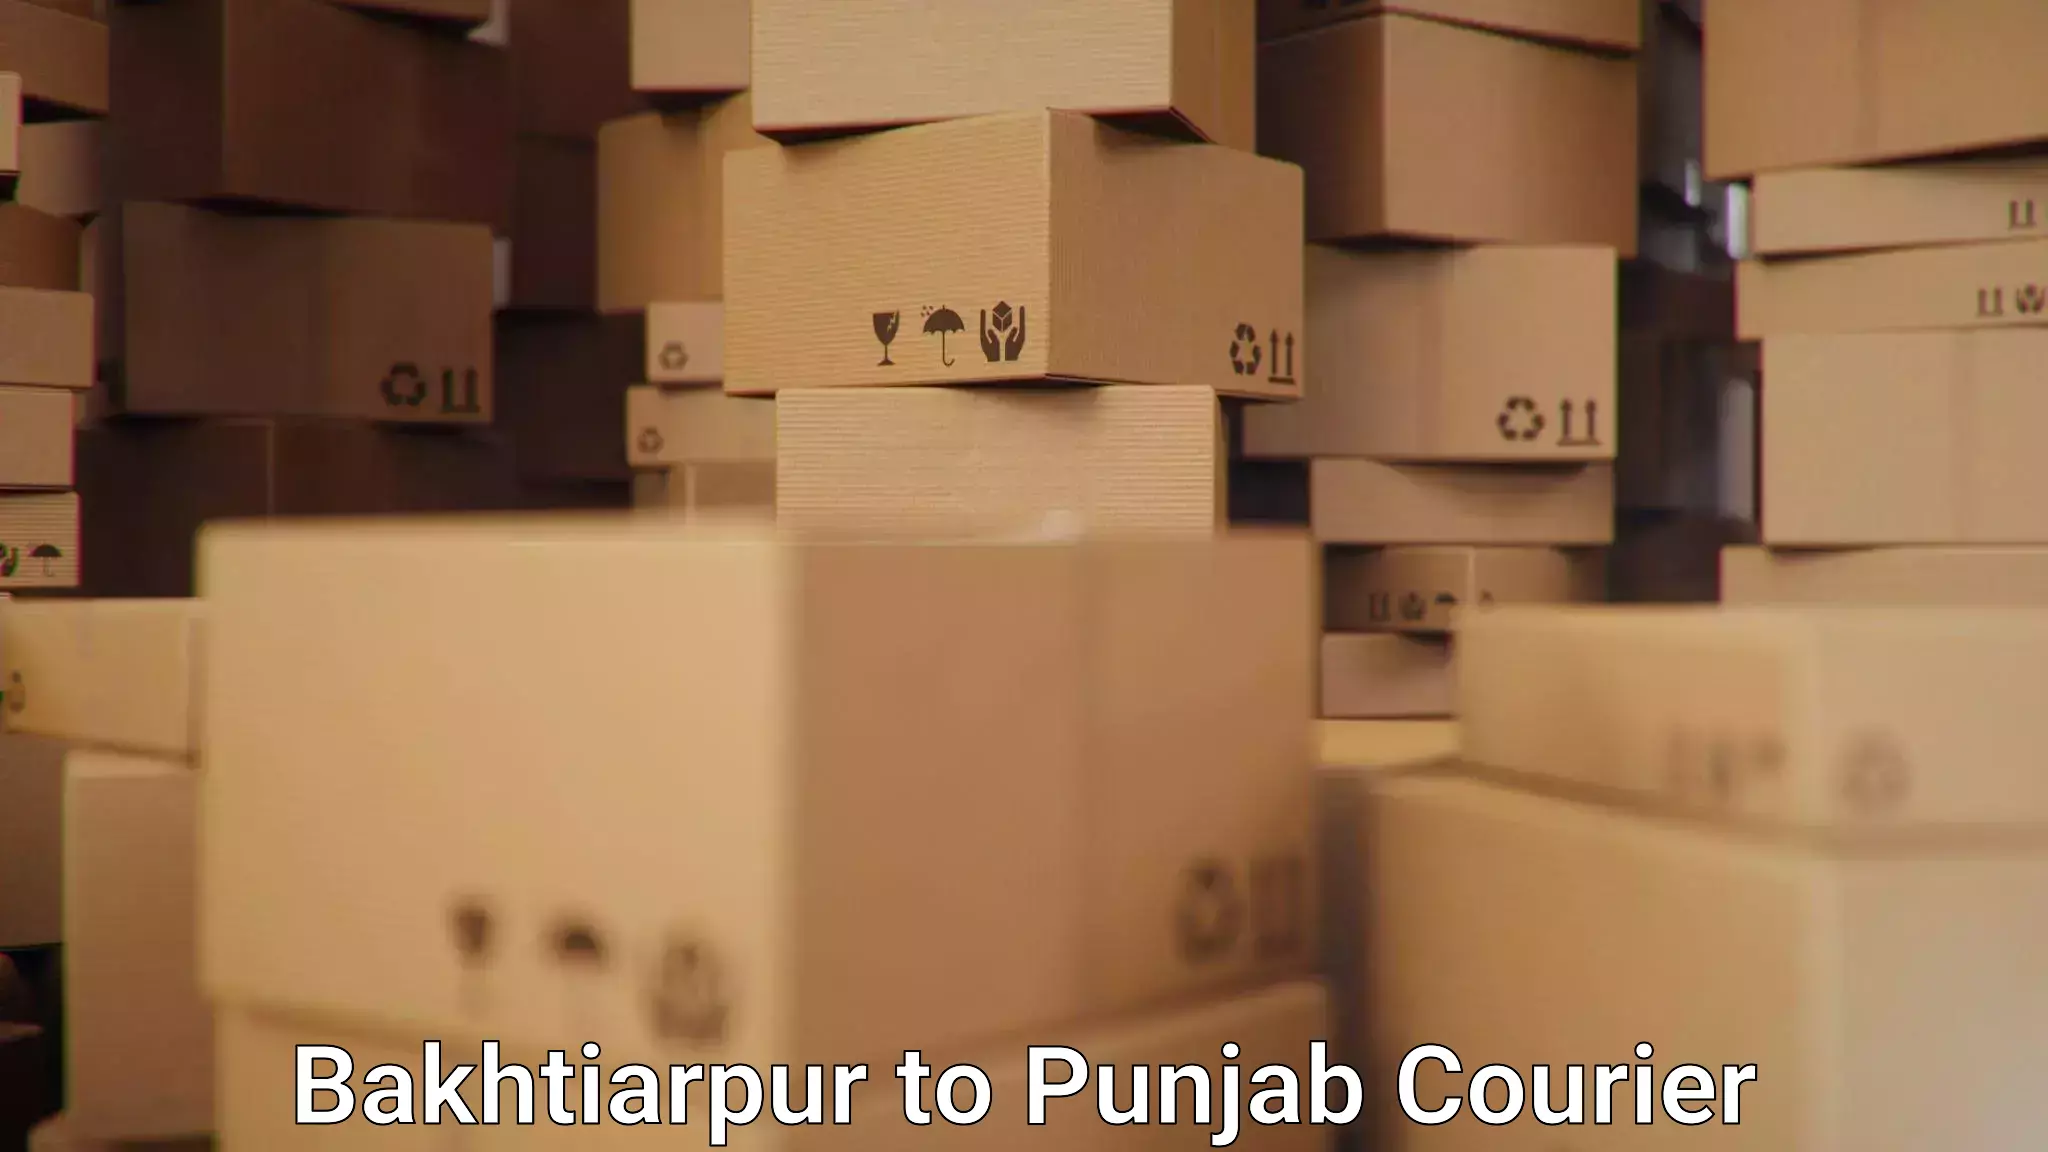 Flexible delivery schedules Bakhtiarpur to Bagha Purana